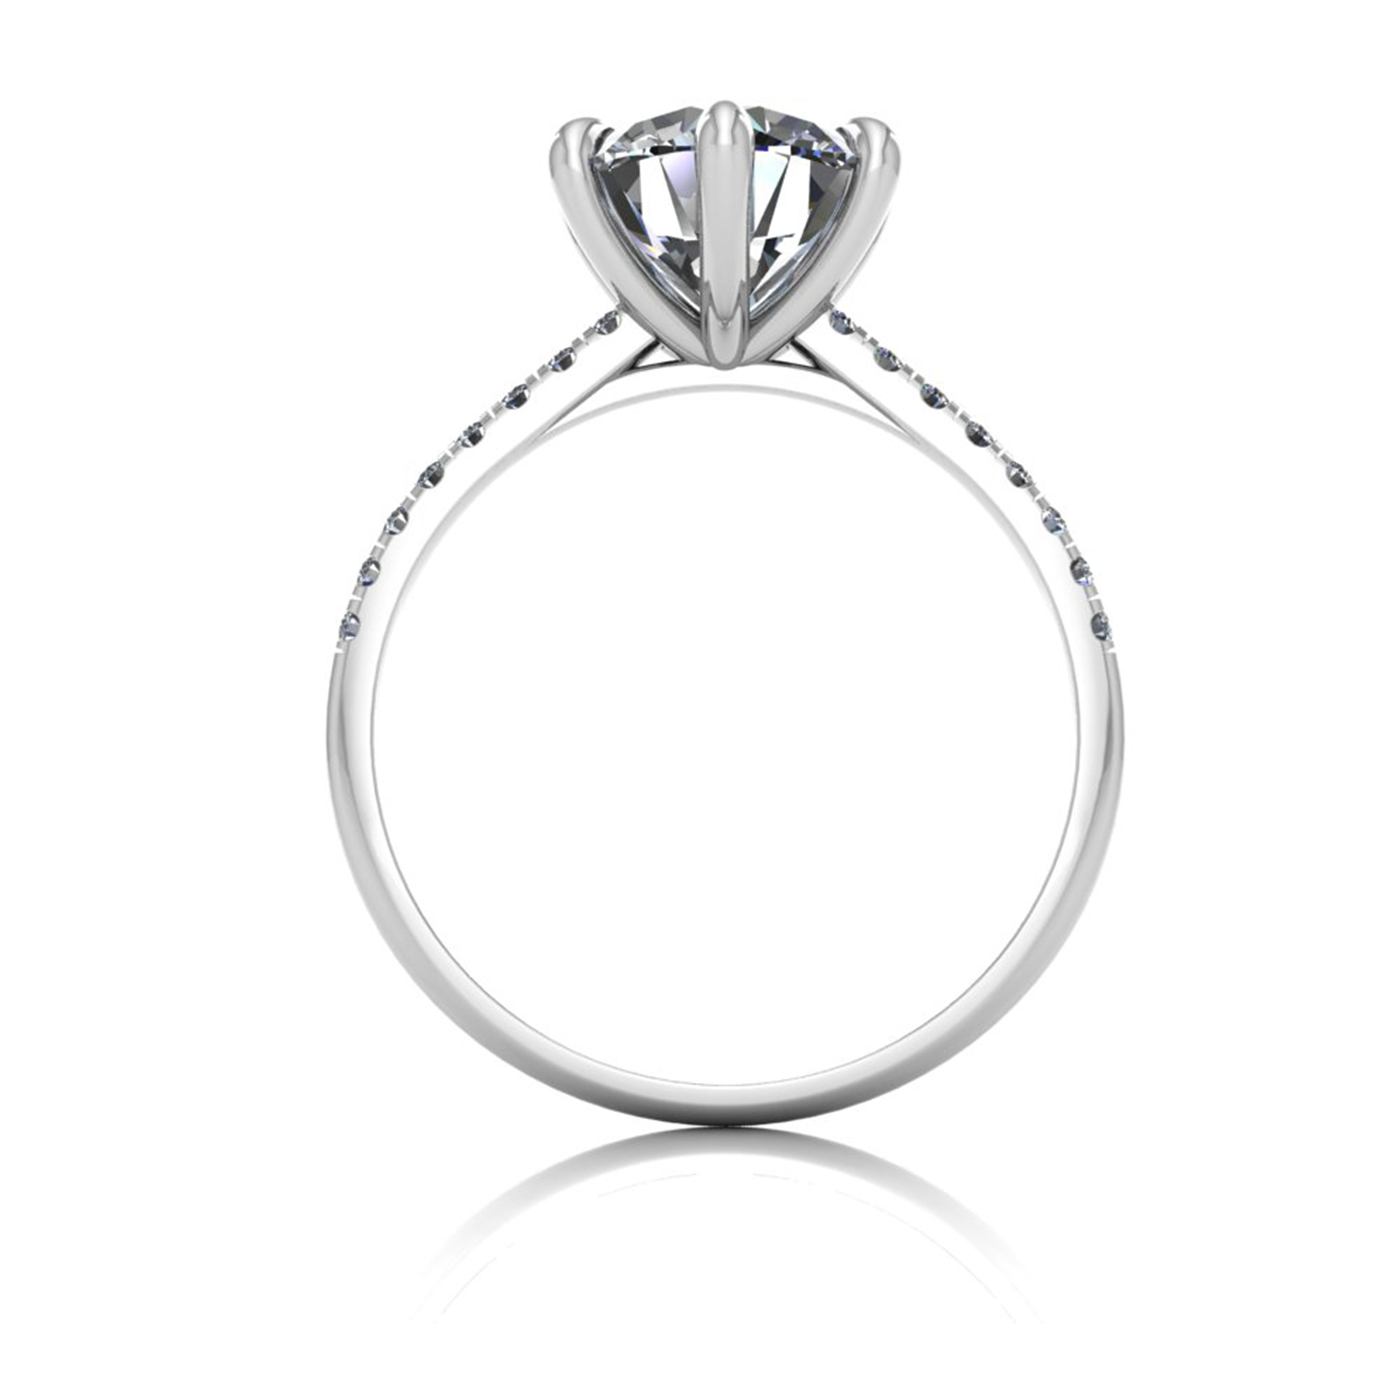 18k white gold 2,00 ct 6 prongs round cut diamond engagement ring with whisper thin pavÉ set band